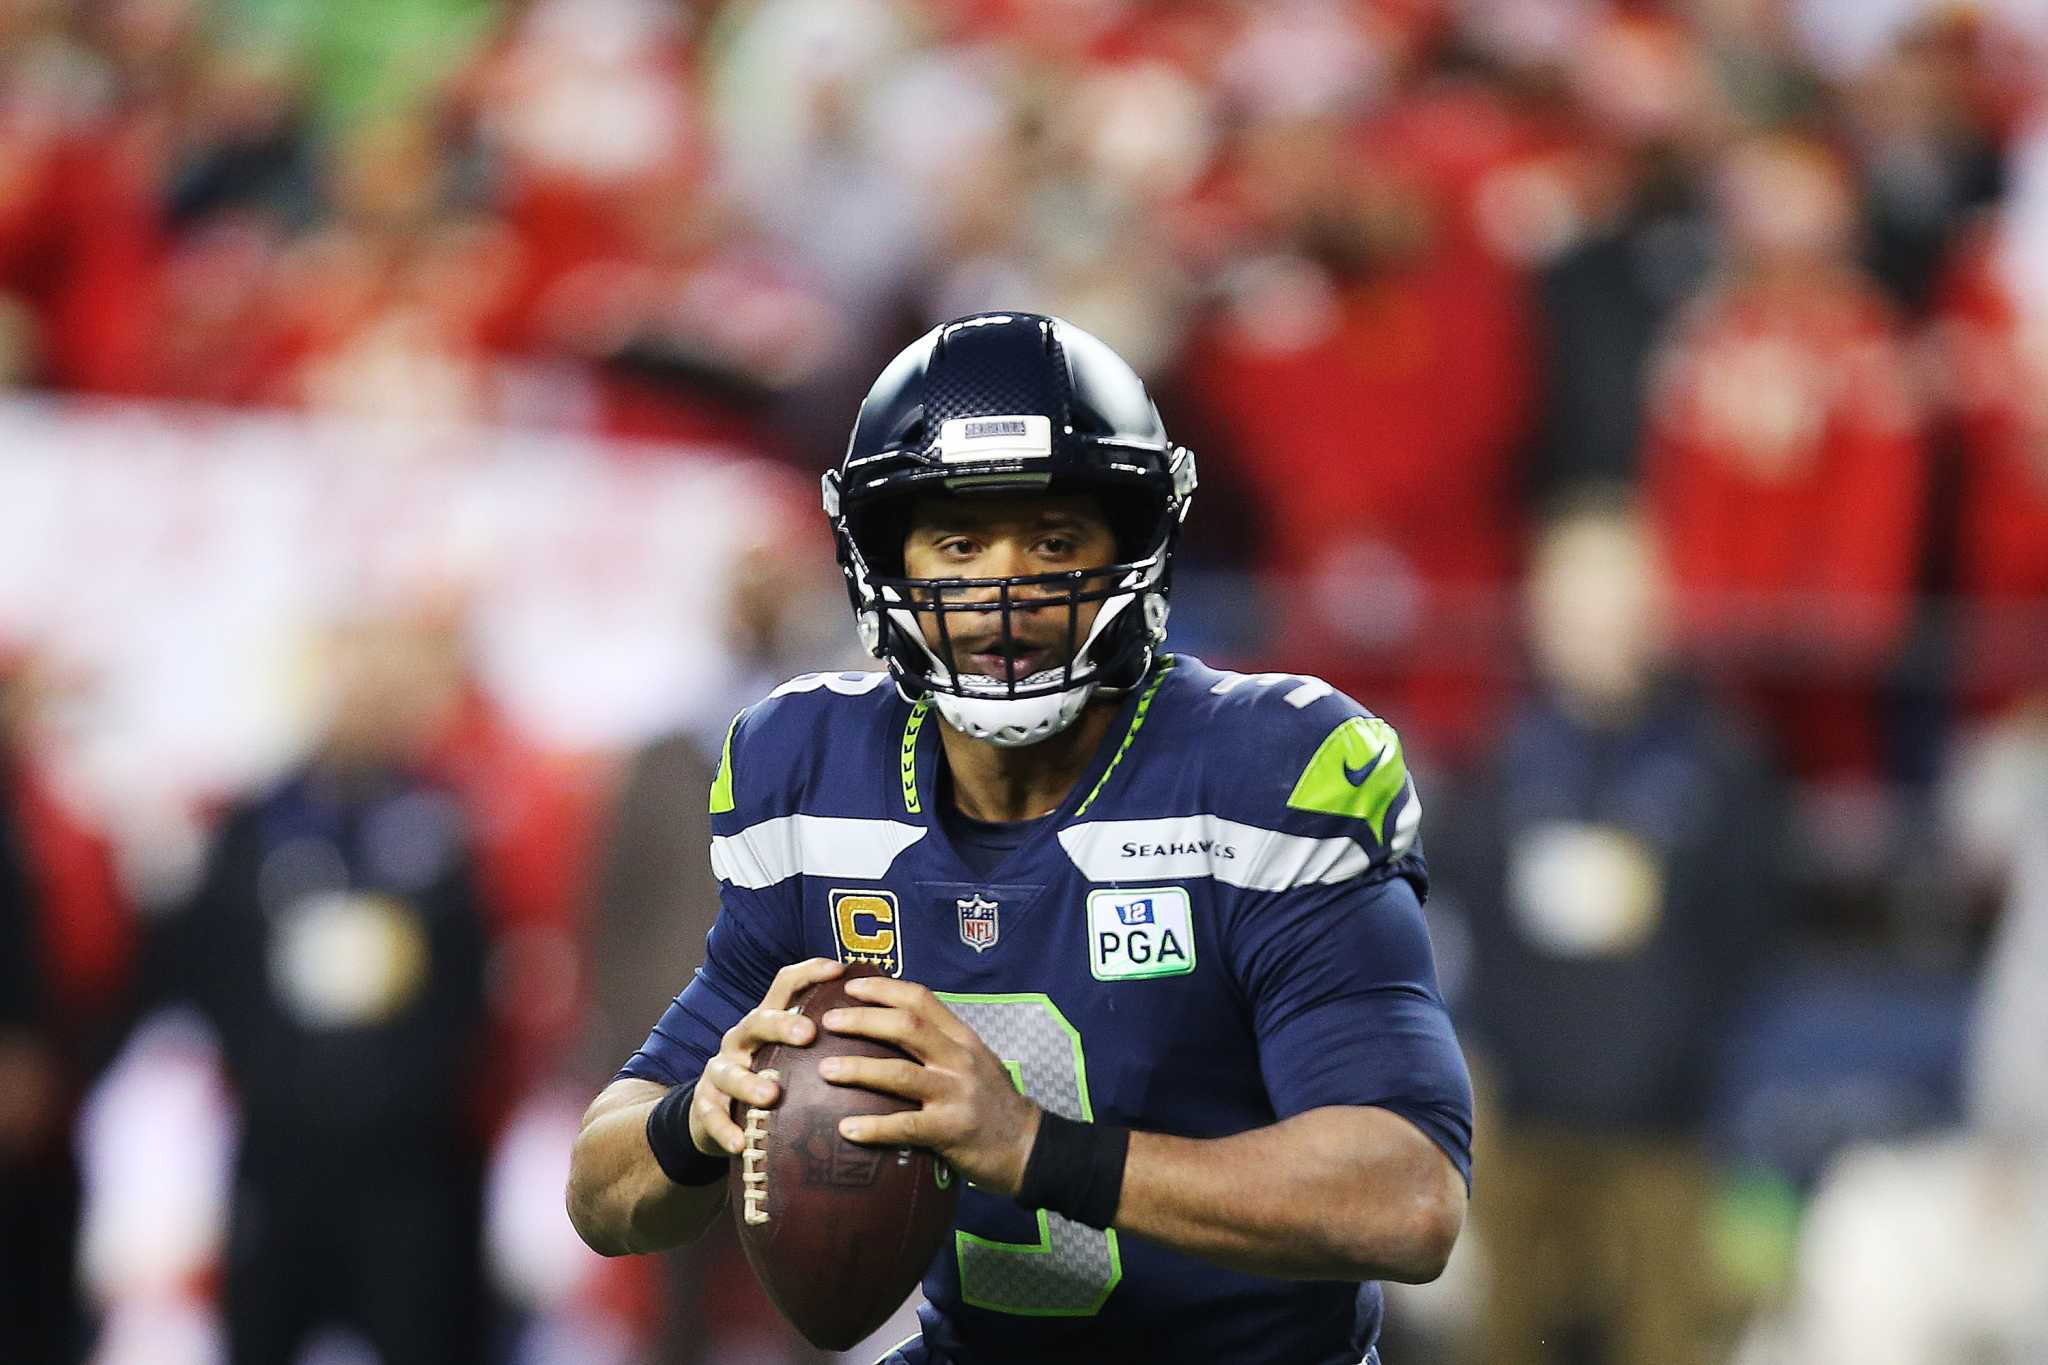 Report: No contract extension talk for Seahawks' Wilson has taken place